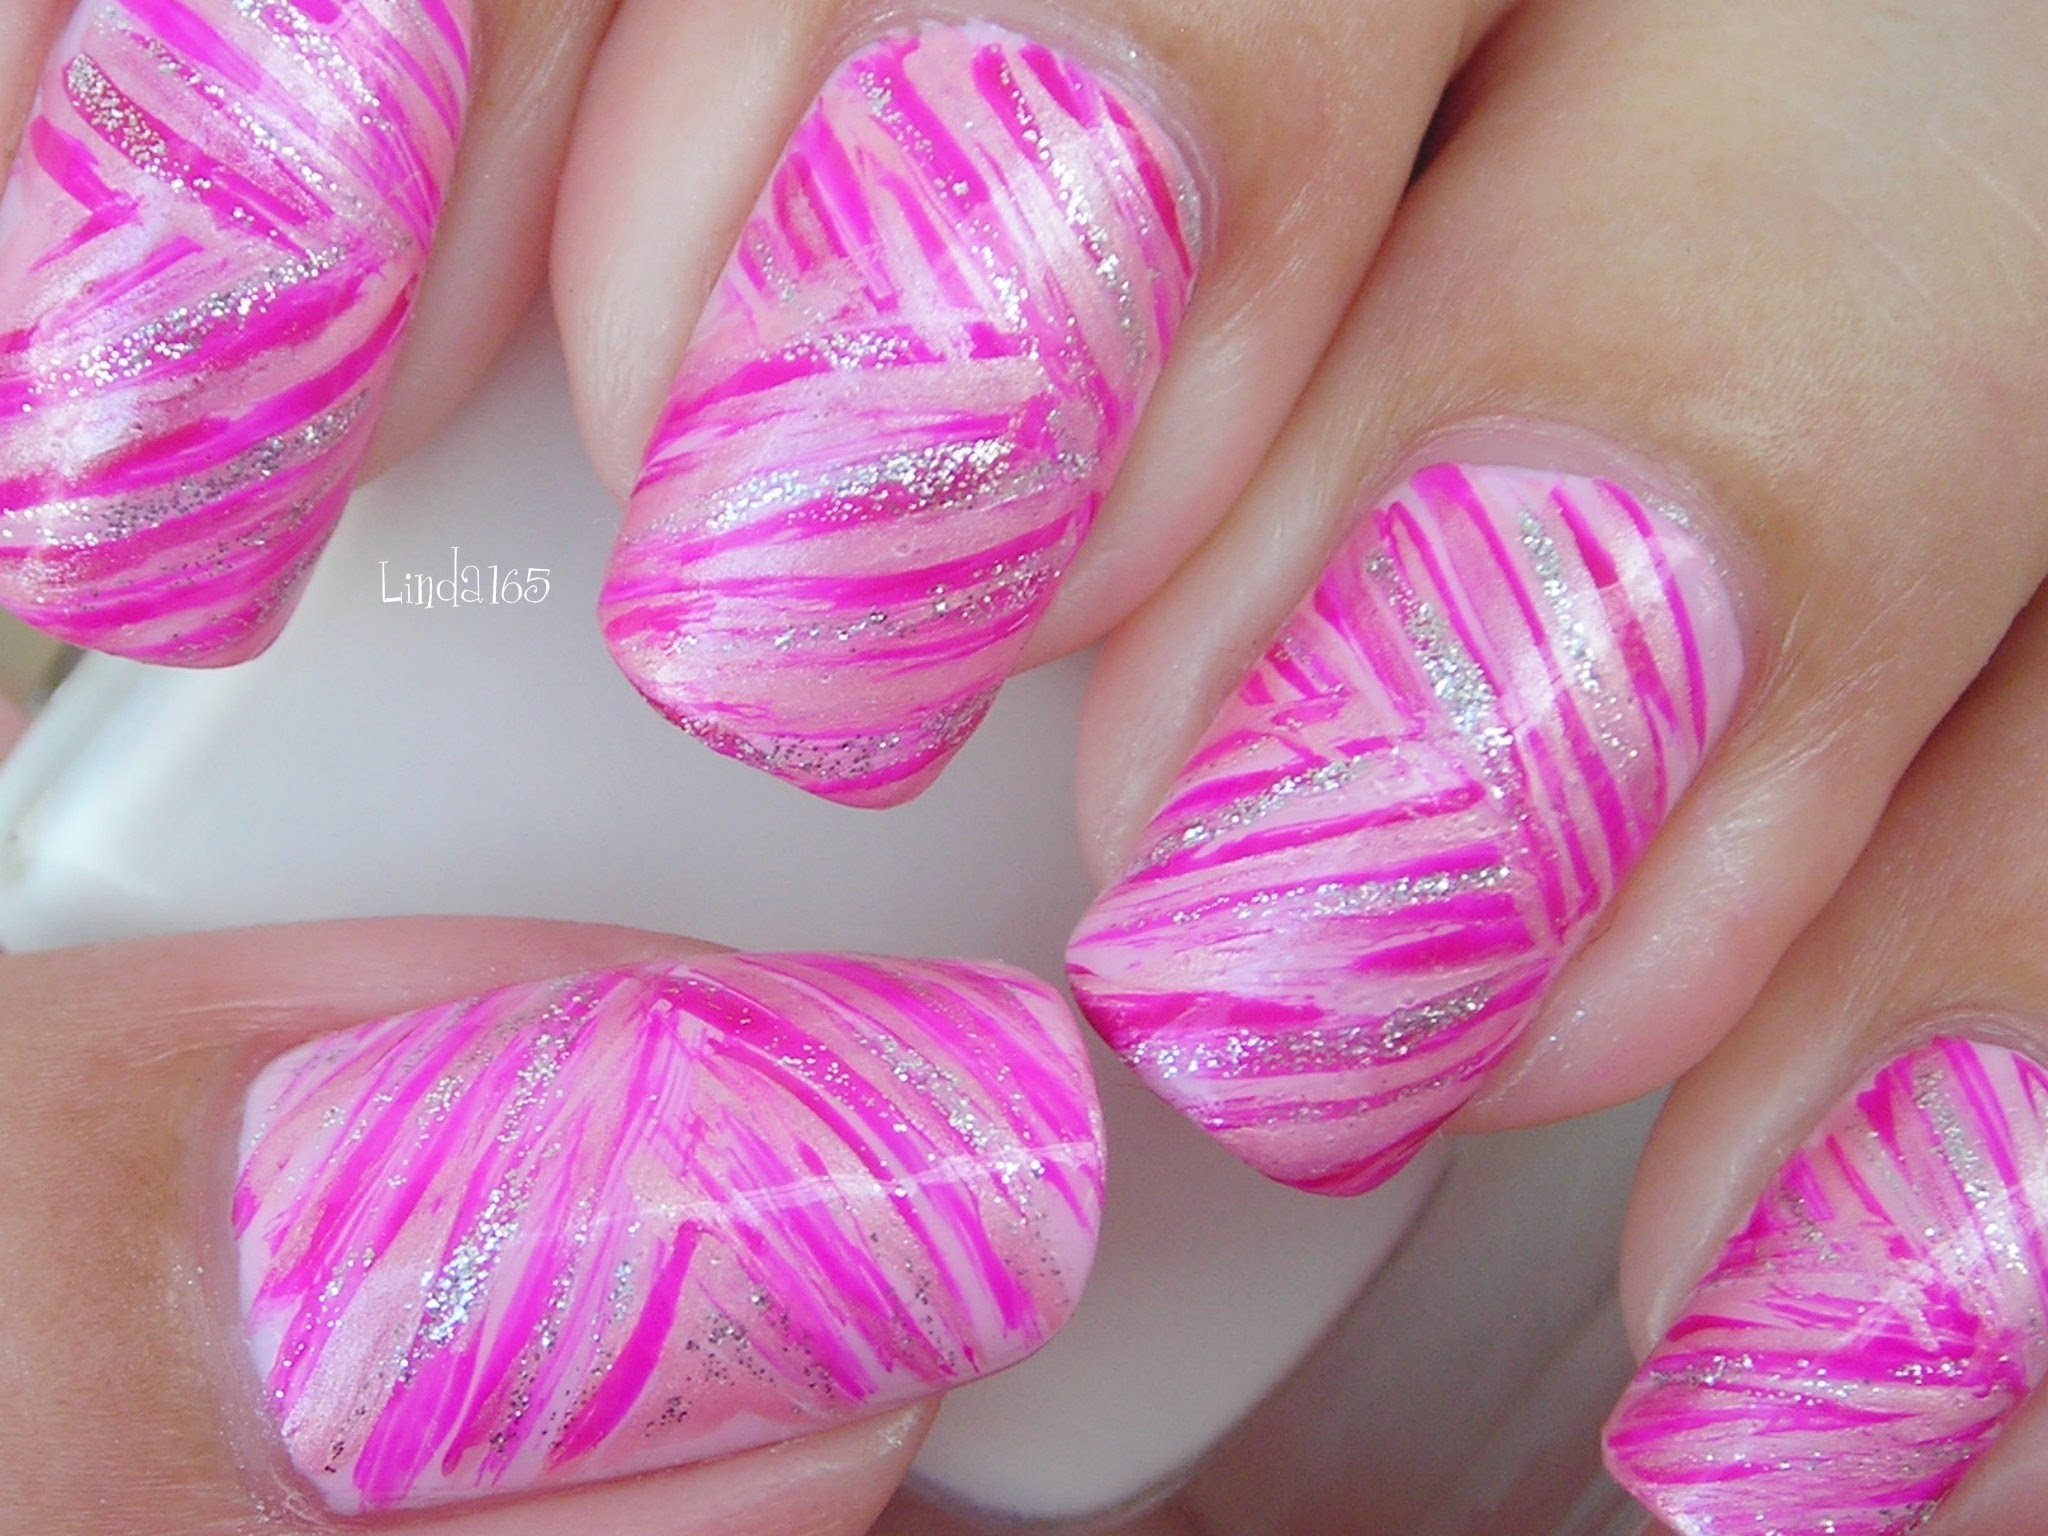 2048x1536 Nail Art - October in Pink: Pink Ribbons - DecoraciÃ³n de uÃ±as - Breast  Cancer Awareness Month - YouTube